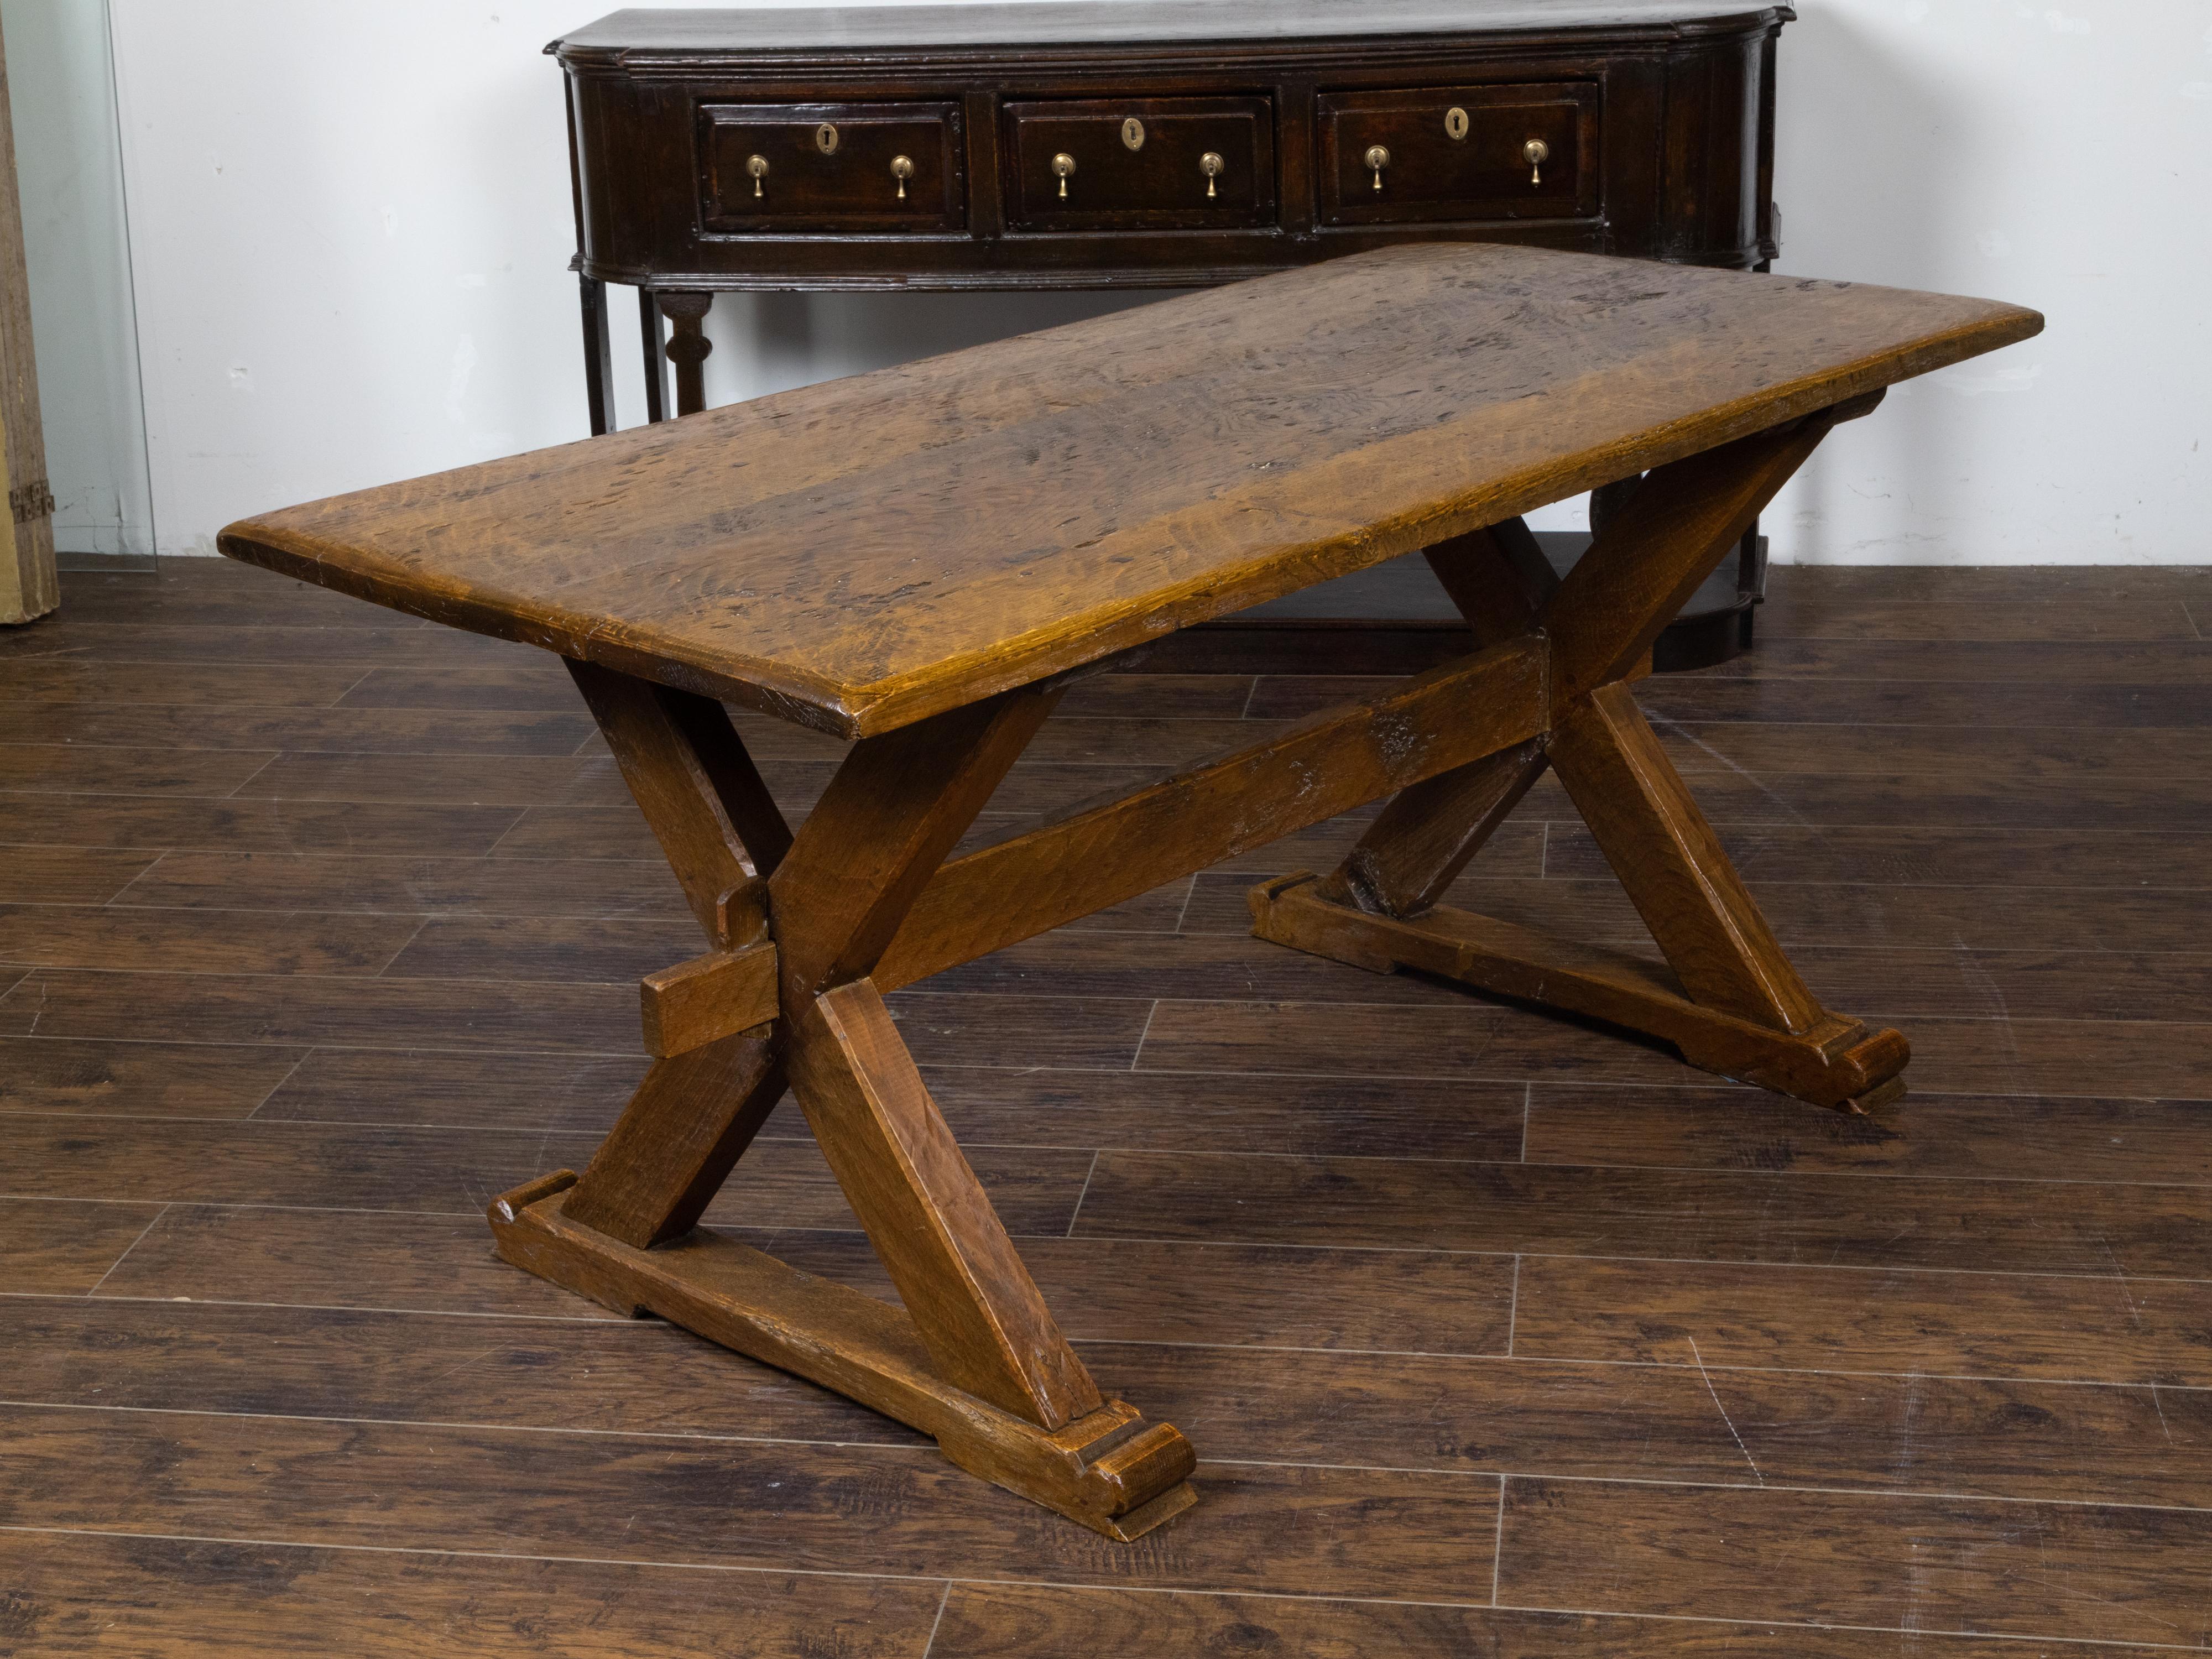 An English oak sawbuck farm table from the 19th century, with double X-Form base, plain cross stretcher and great rustic character. Created in England during the 19th century, this oak sawbuck table features a rectangular planked top with distressed